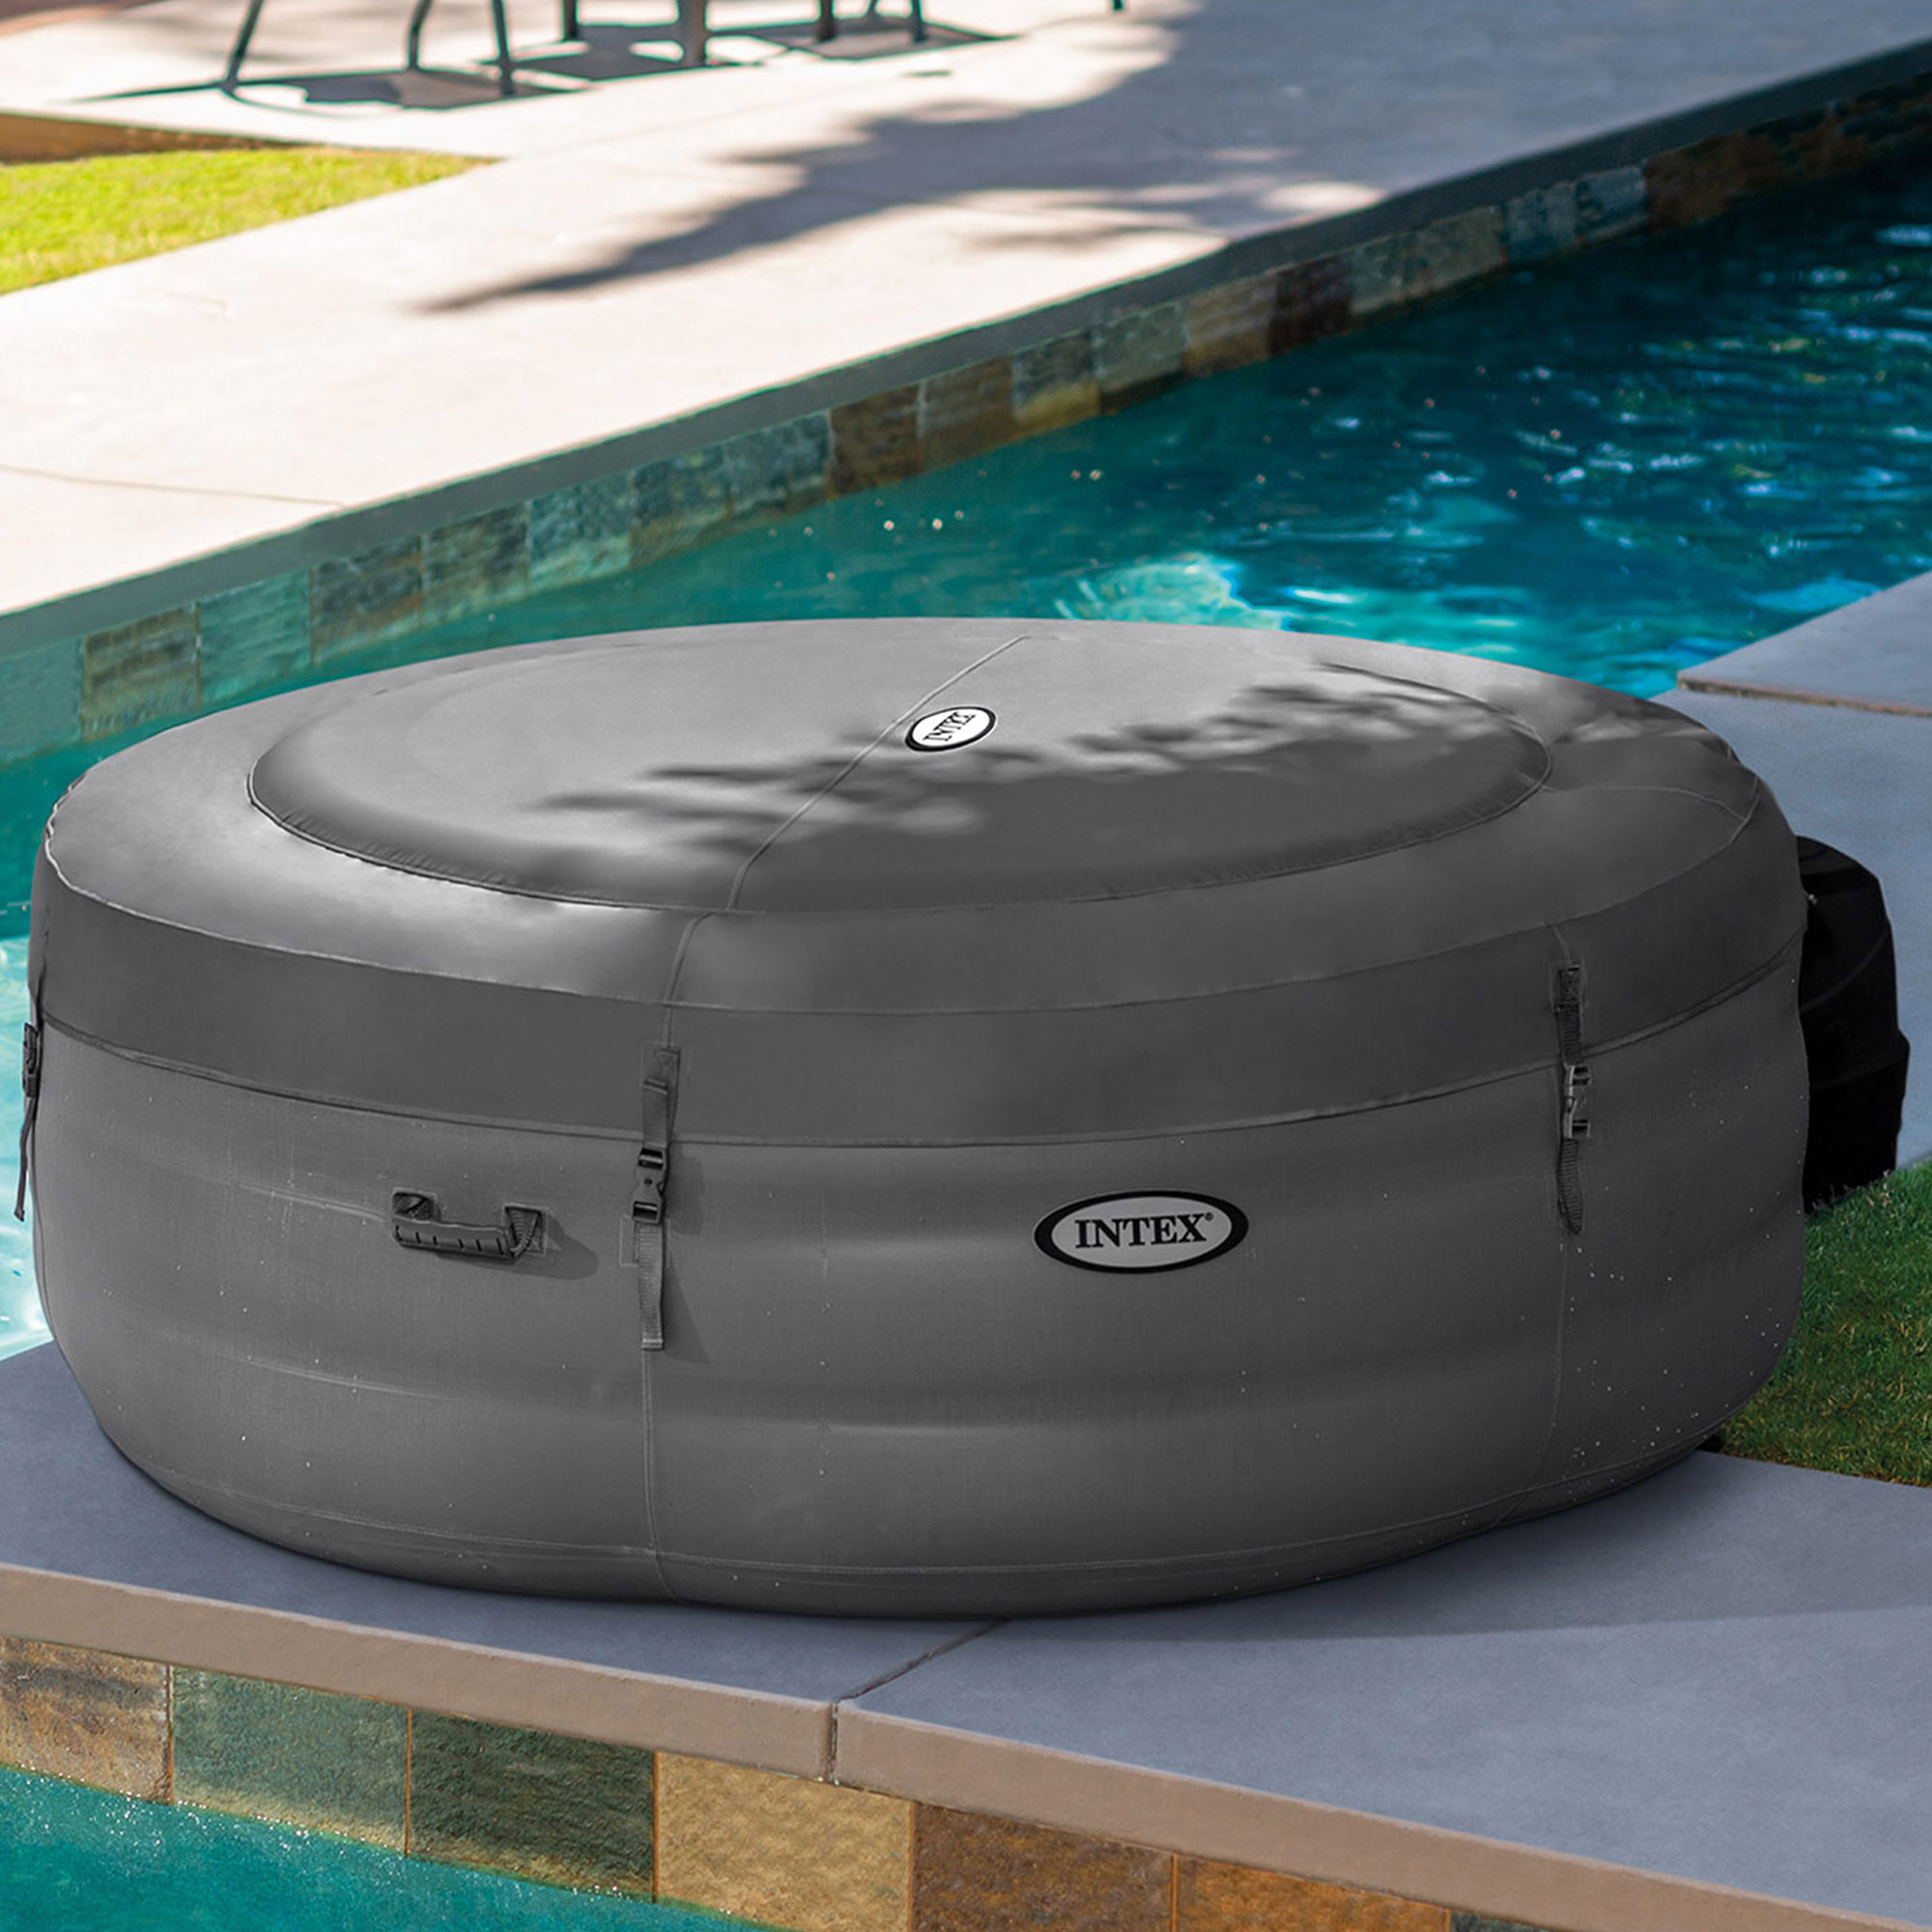 Intex 28481E Simple Spa 77in x 26in Inflatable Hot Tub with Filter Pump & Cover - image 4 of 11